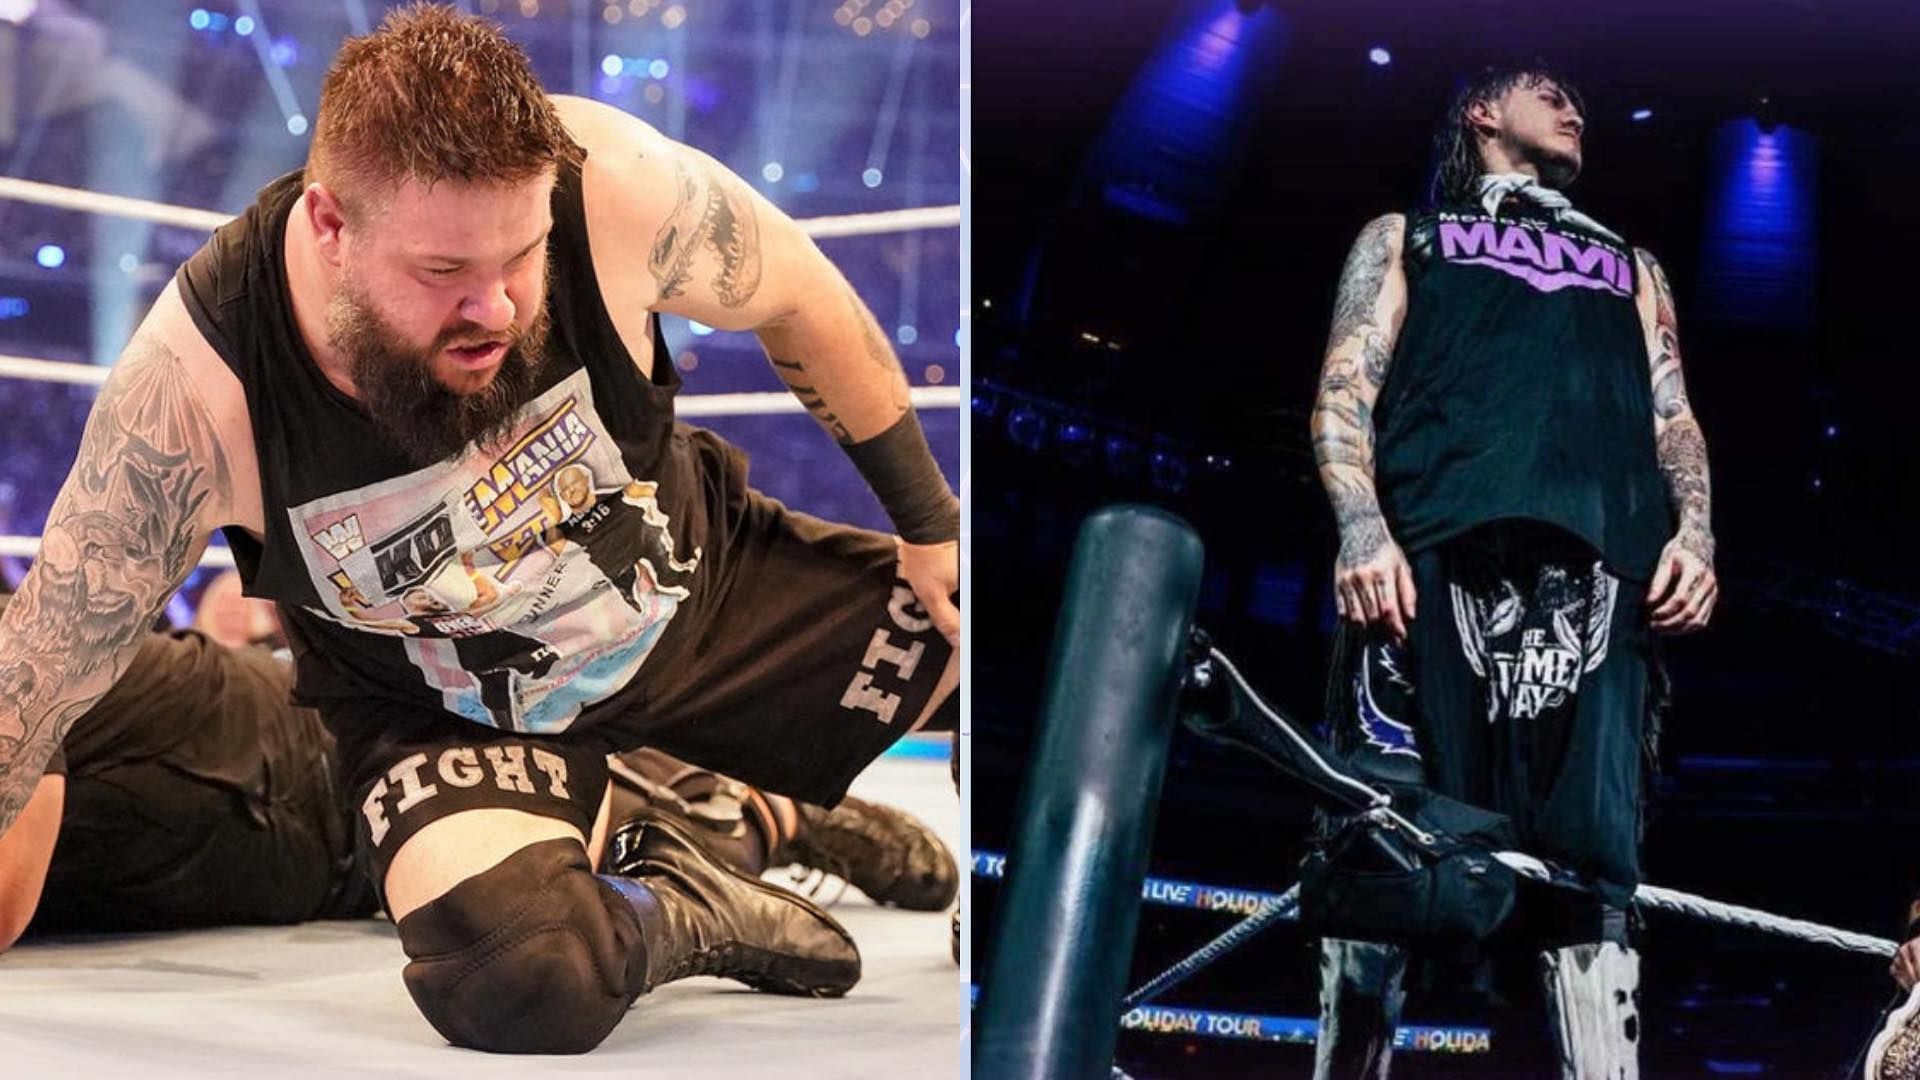 Kevin Owens will face Dominik Mysterio in the Elimination Chamber qualifying match on SmackDown 